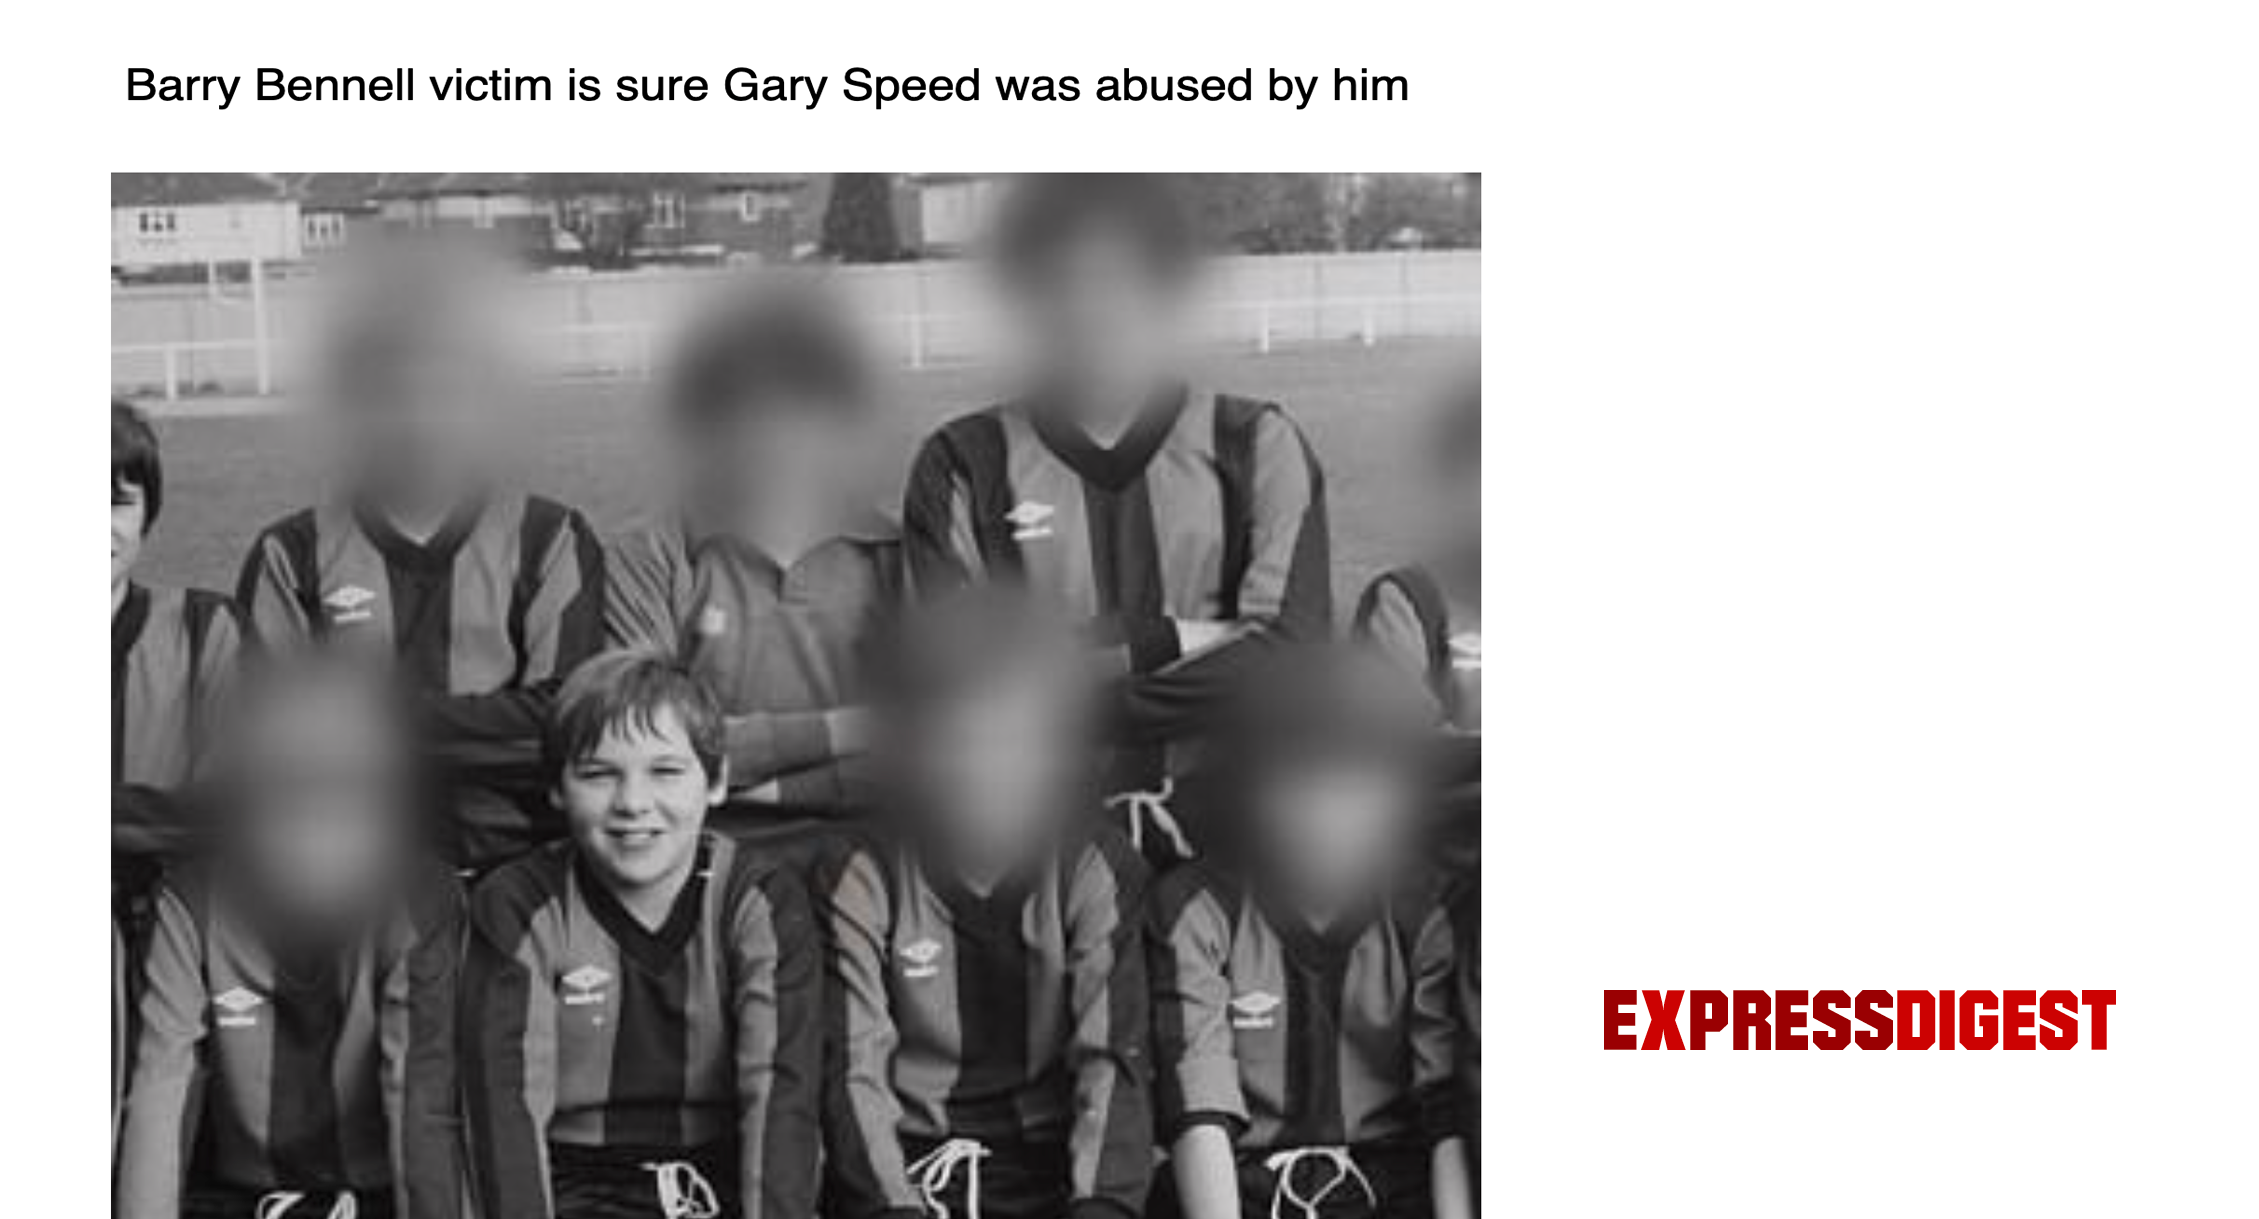 Barry Bennell victim is sure Gary Speed was abused by him